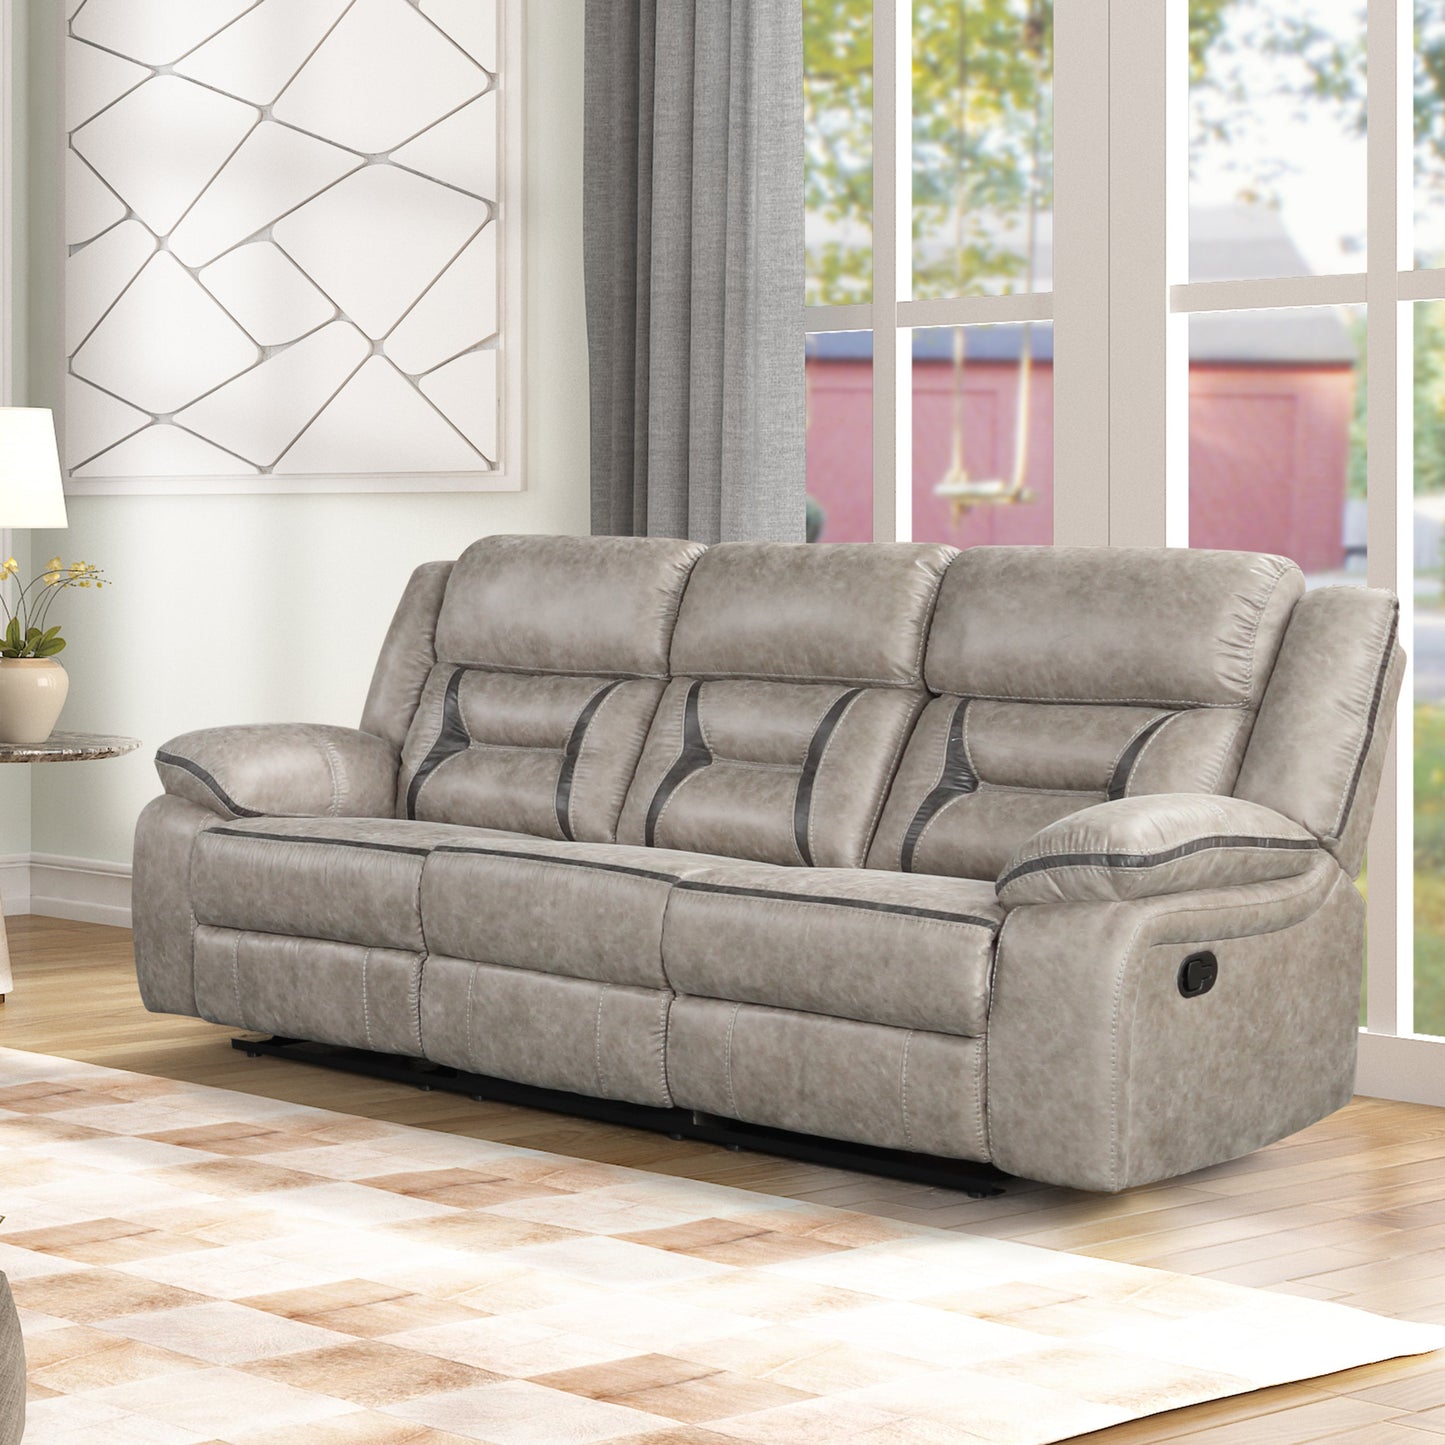 Elkton Manual Motion Reclining Sofa with Storage Console, Taupe